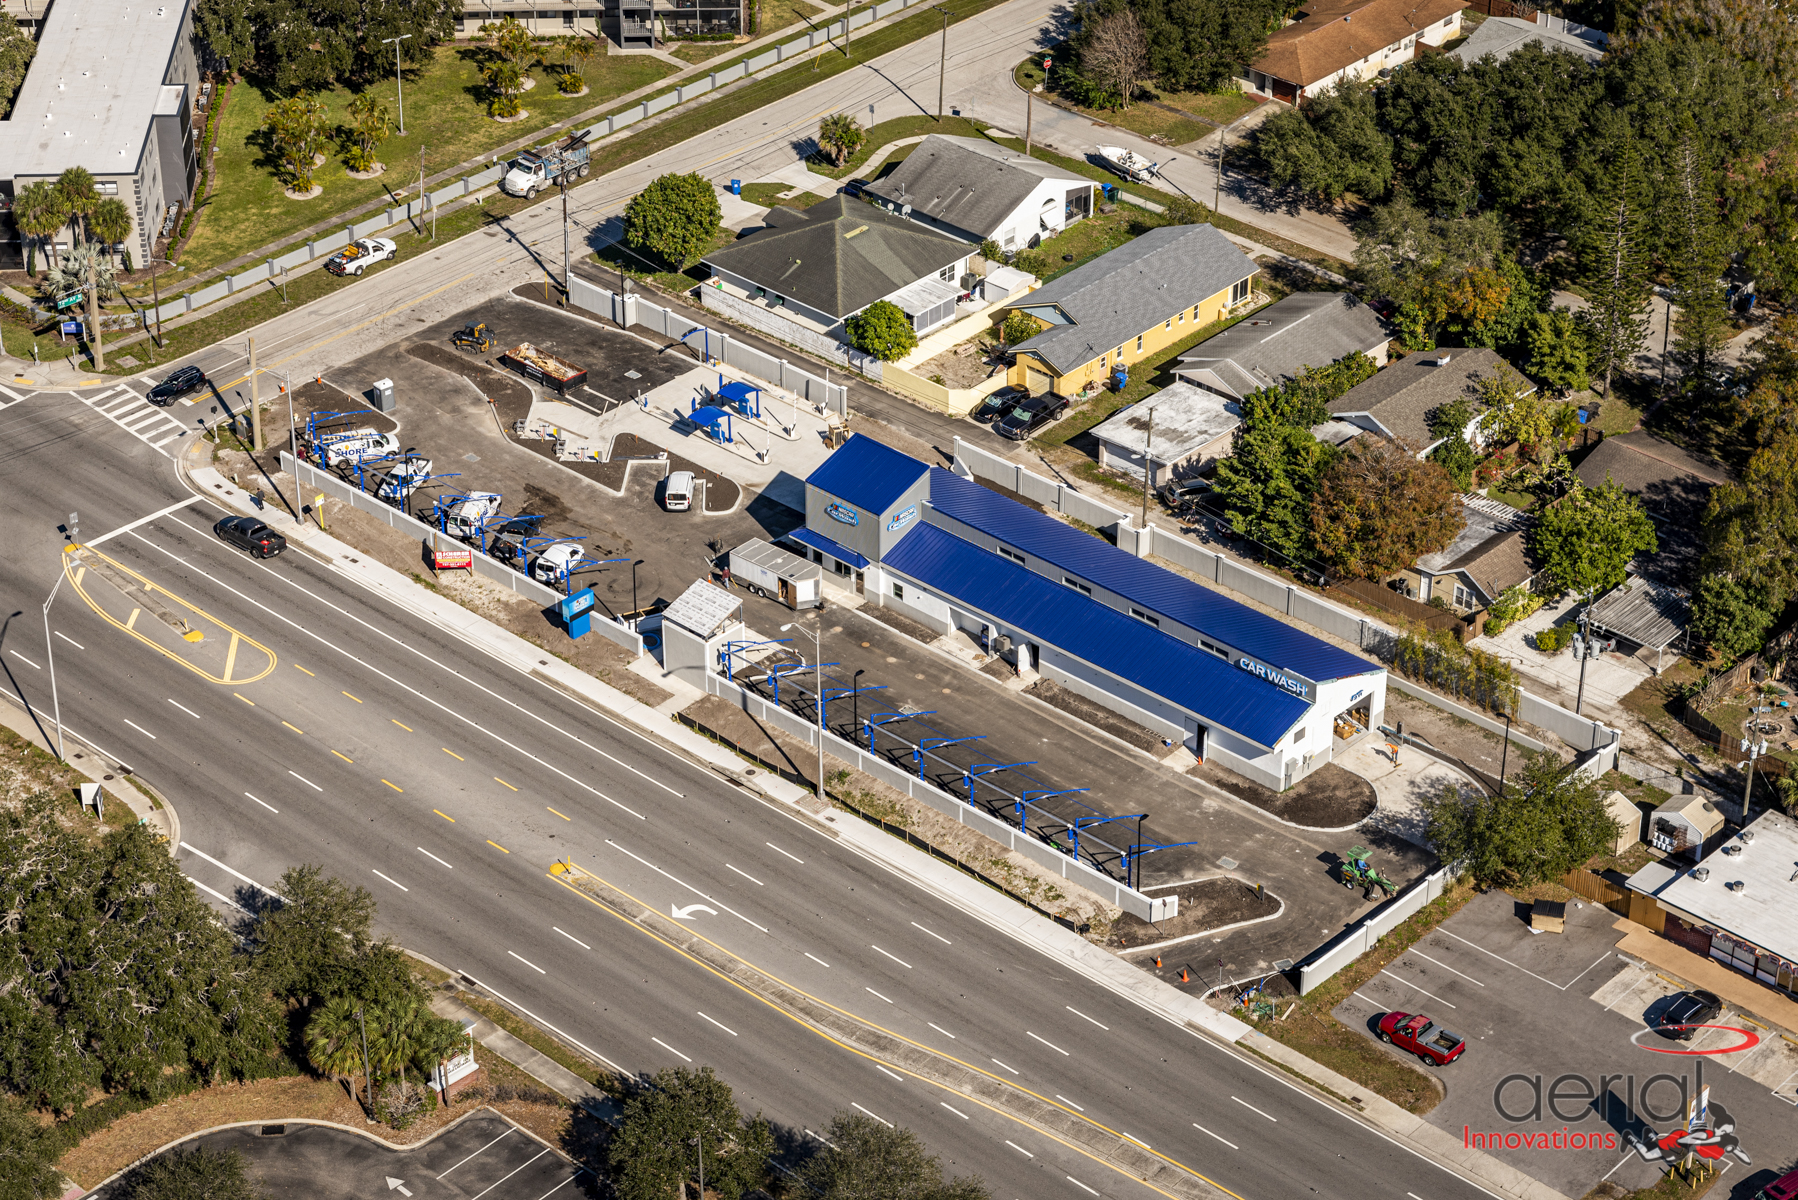 Nascar Car Wash at 7141 4th St. North  brings state-of-art car washing services to St Petersburg